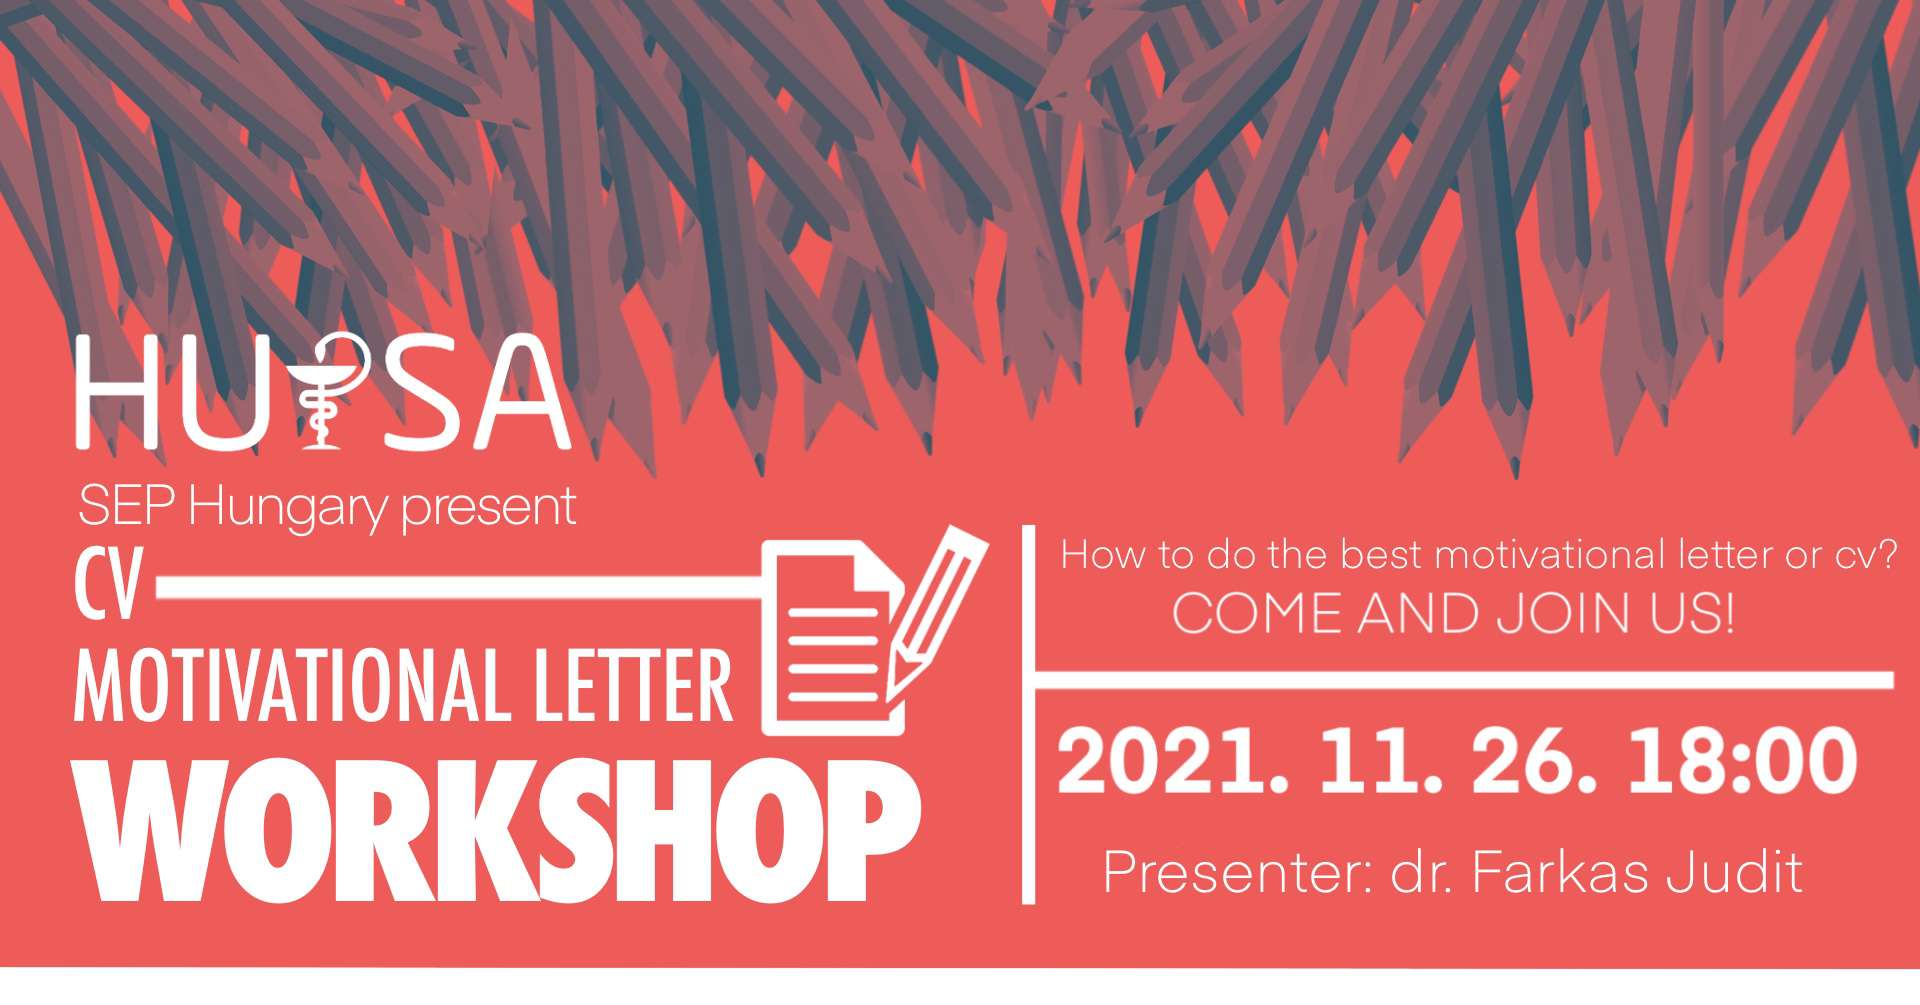 How to write the best motivational letter and CV - Workshop